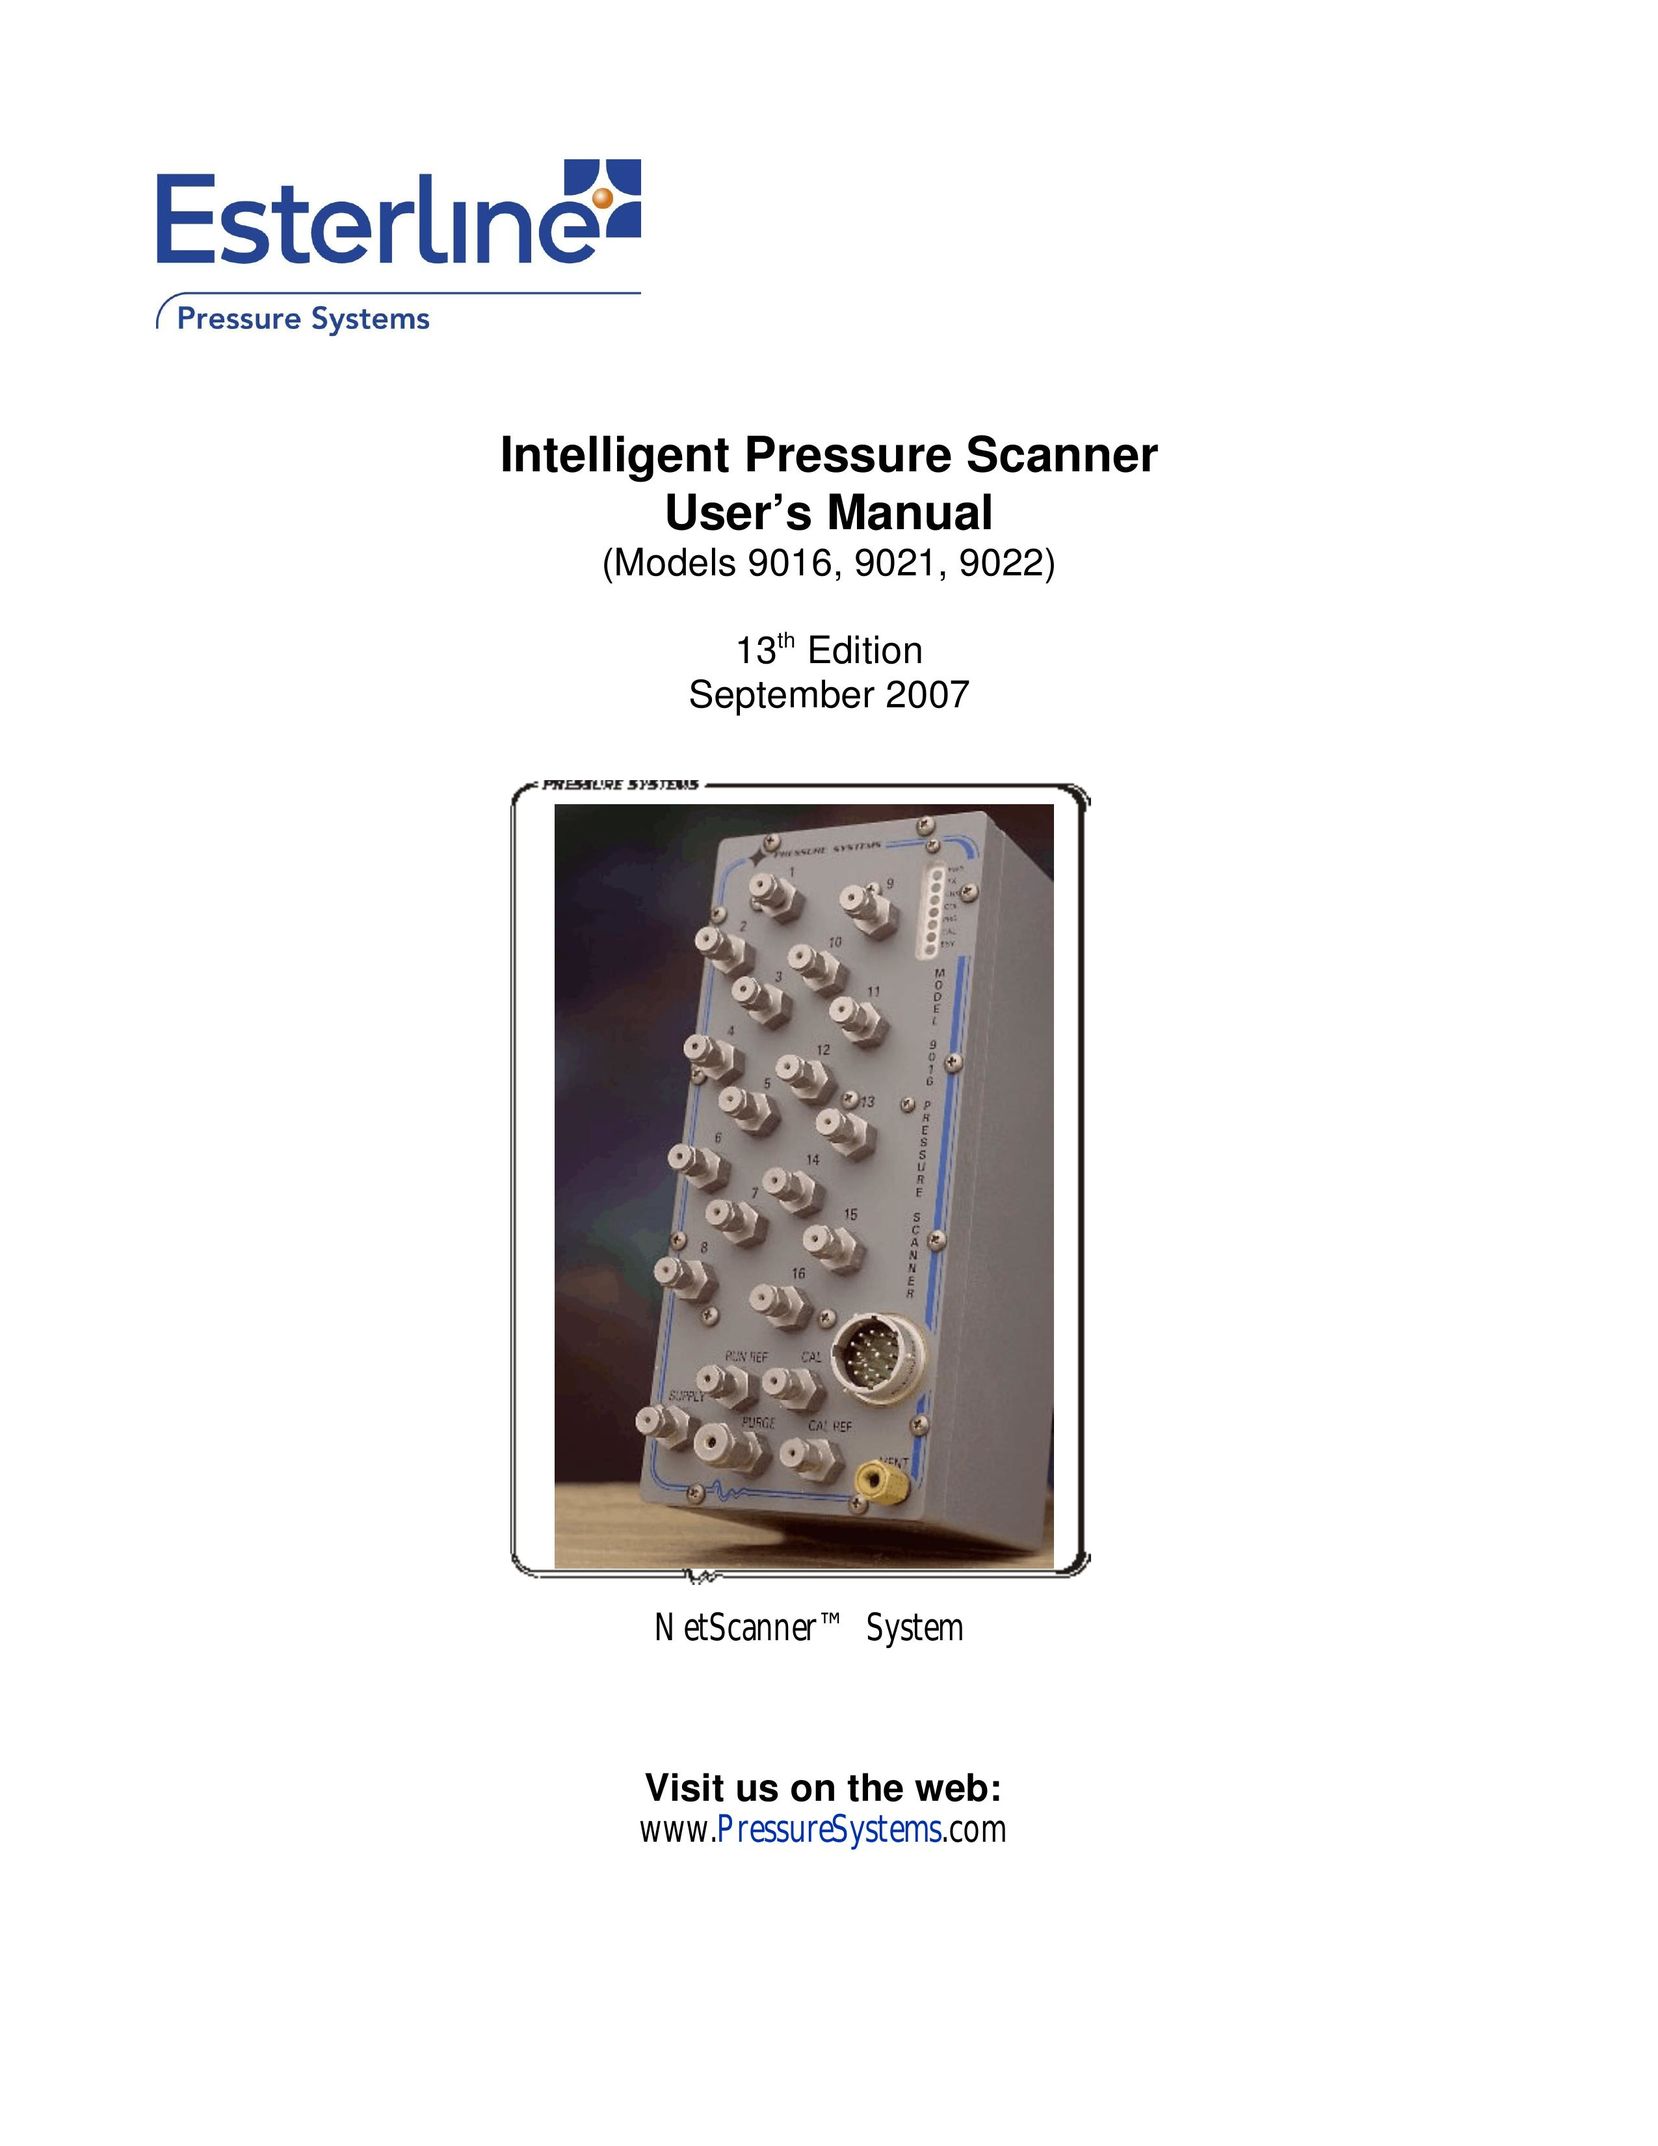 Pressure Systems 9022 Scanner User Manual